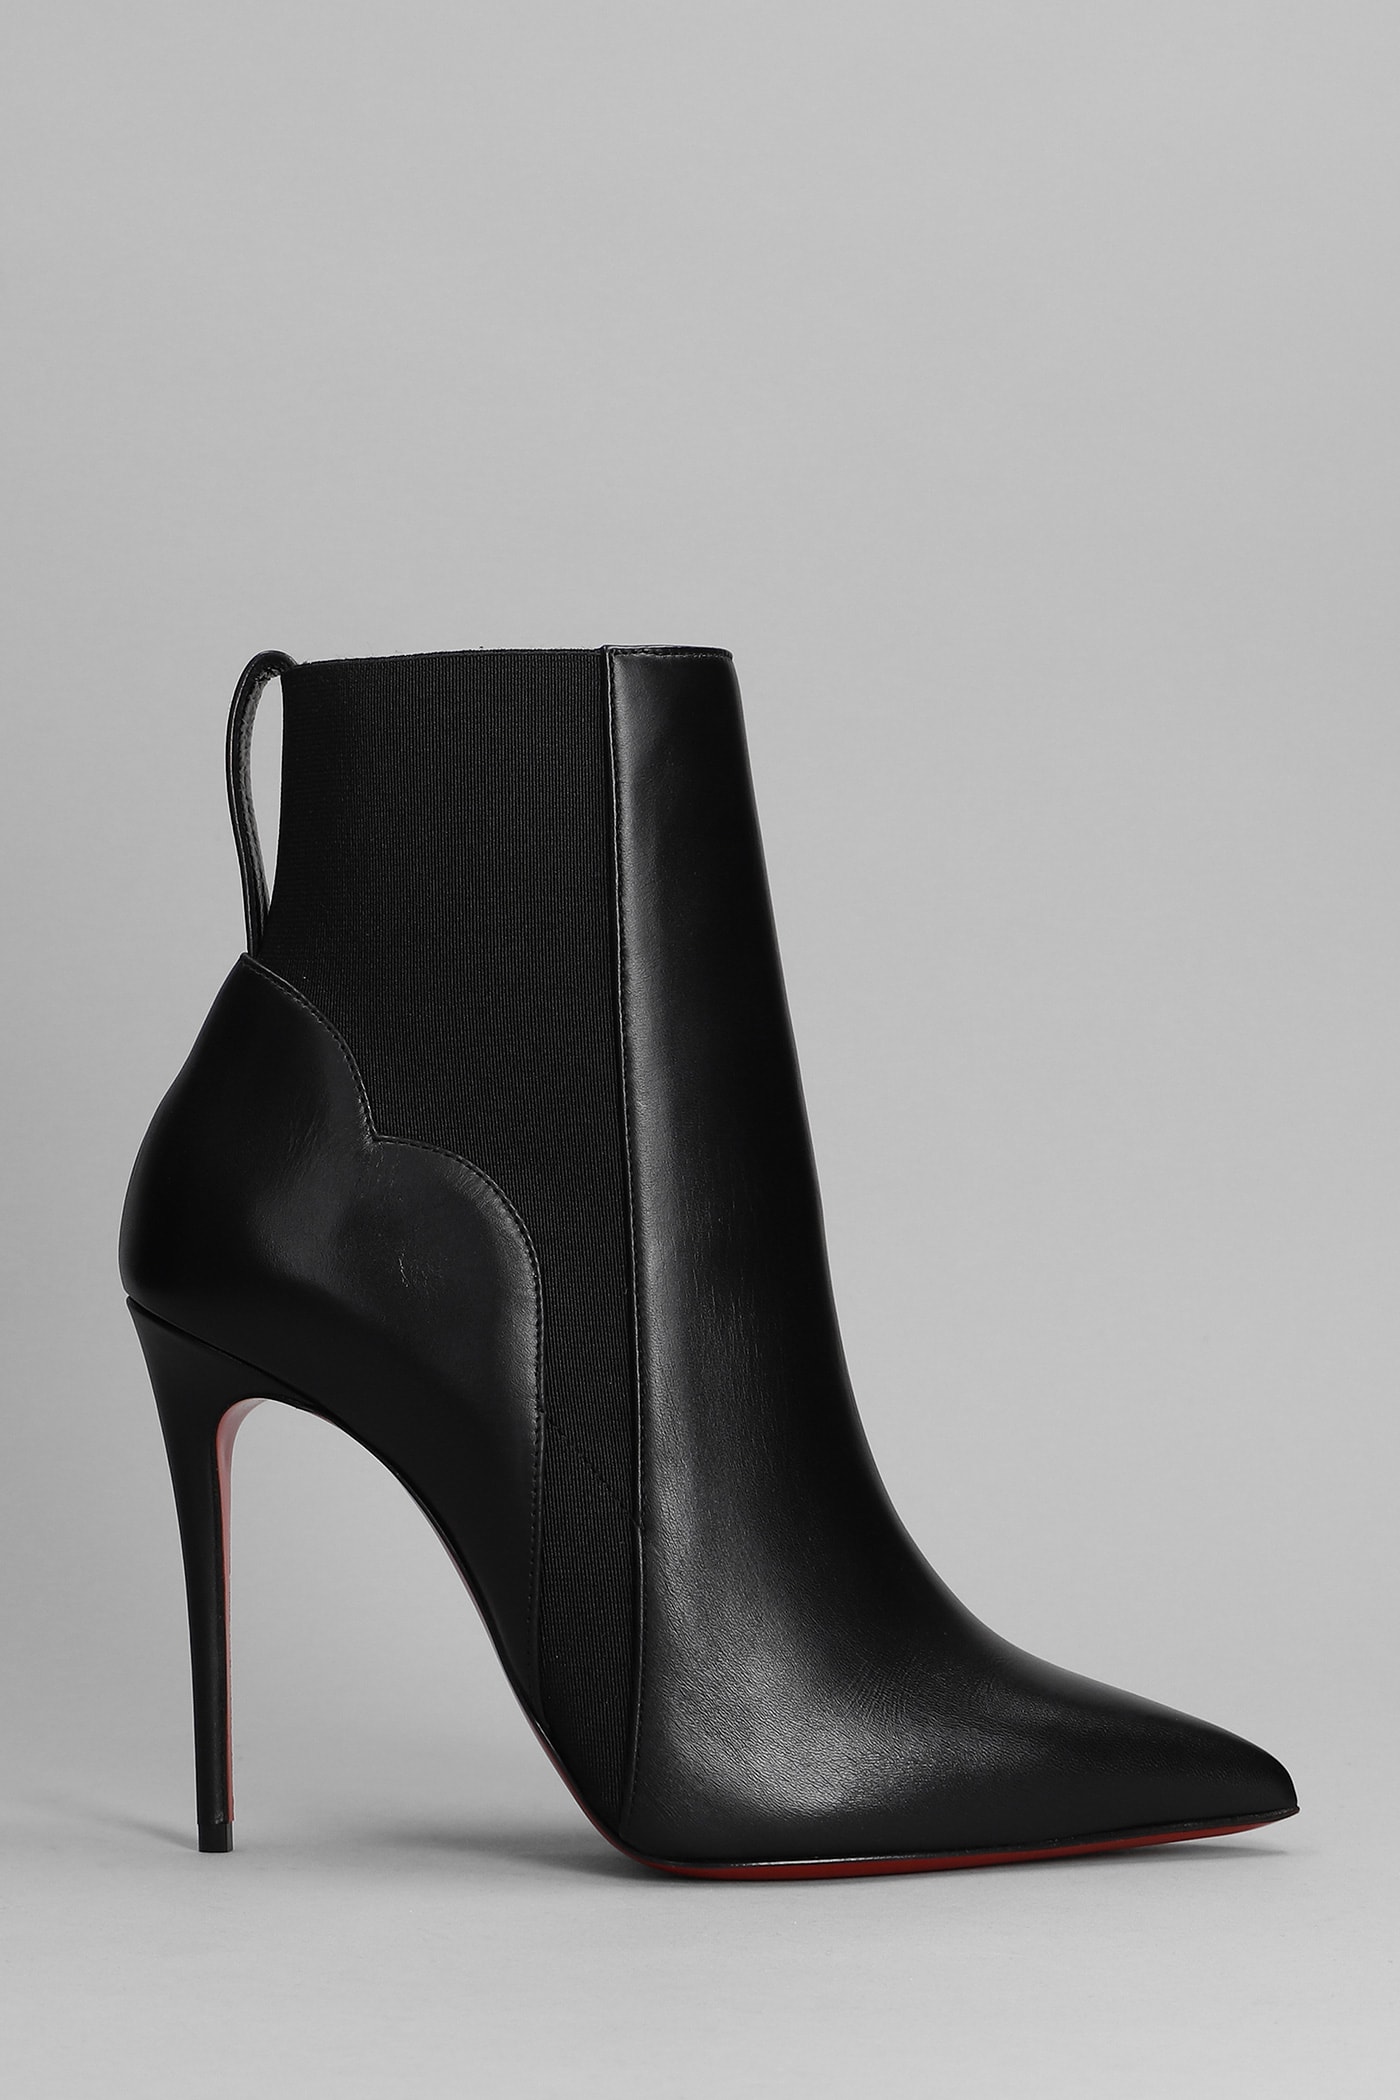 CHRISTIAN LOUBOUTIN CHELSEA CHICK BOOTY HIGH HEELS ANKLE BOOTS IN BLACK LEATHER